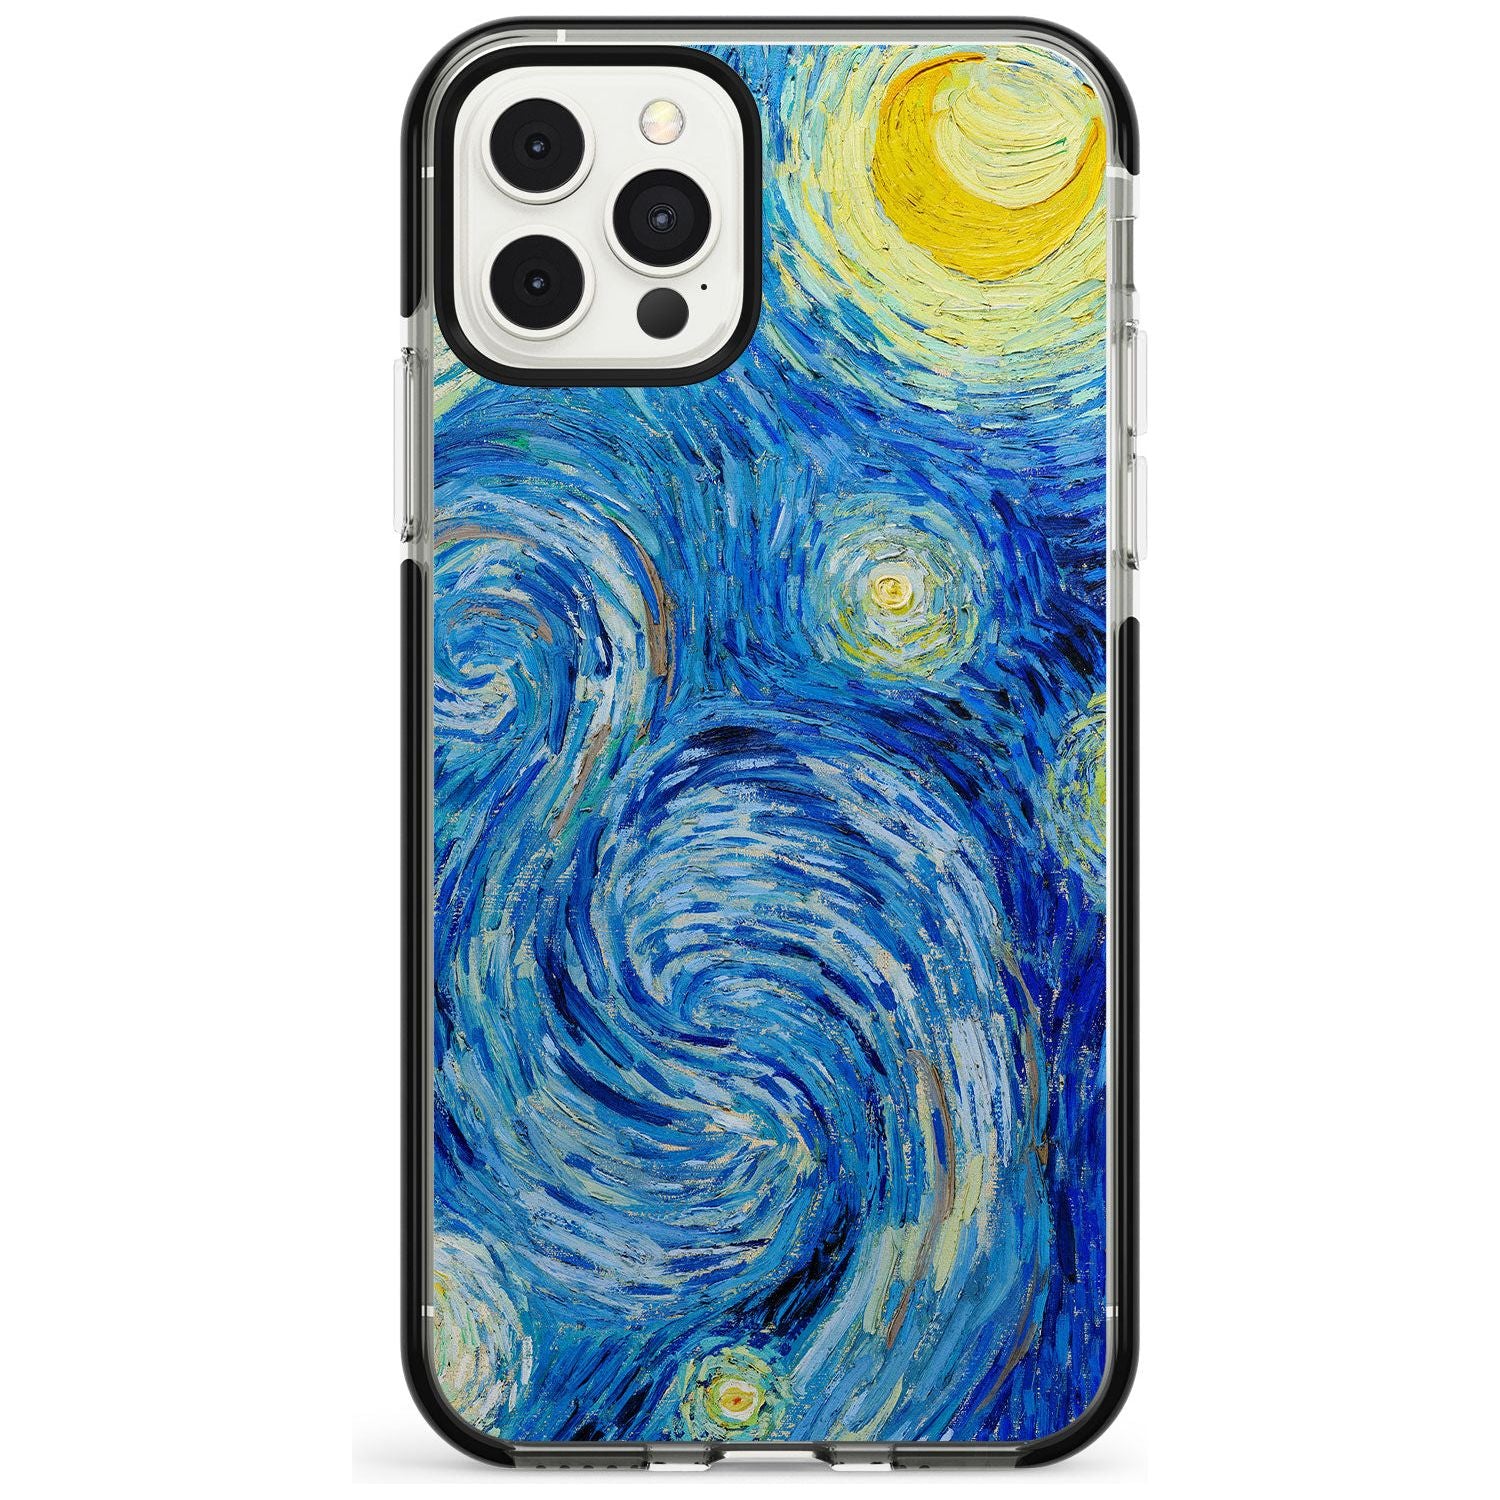 The Starry Night by Vincent Van Gogh Pink Fade Impact Phone Case for iPhone 11